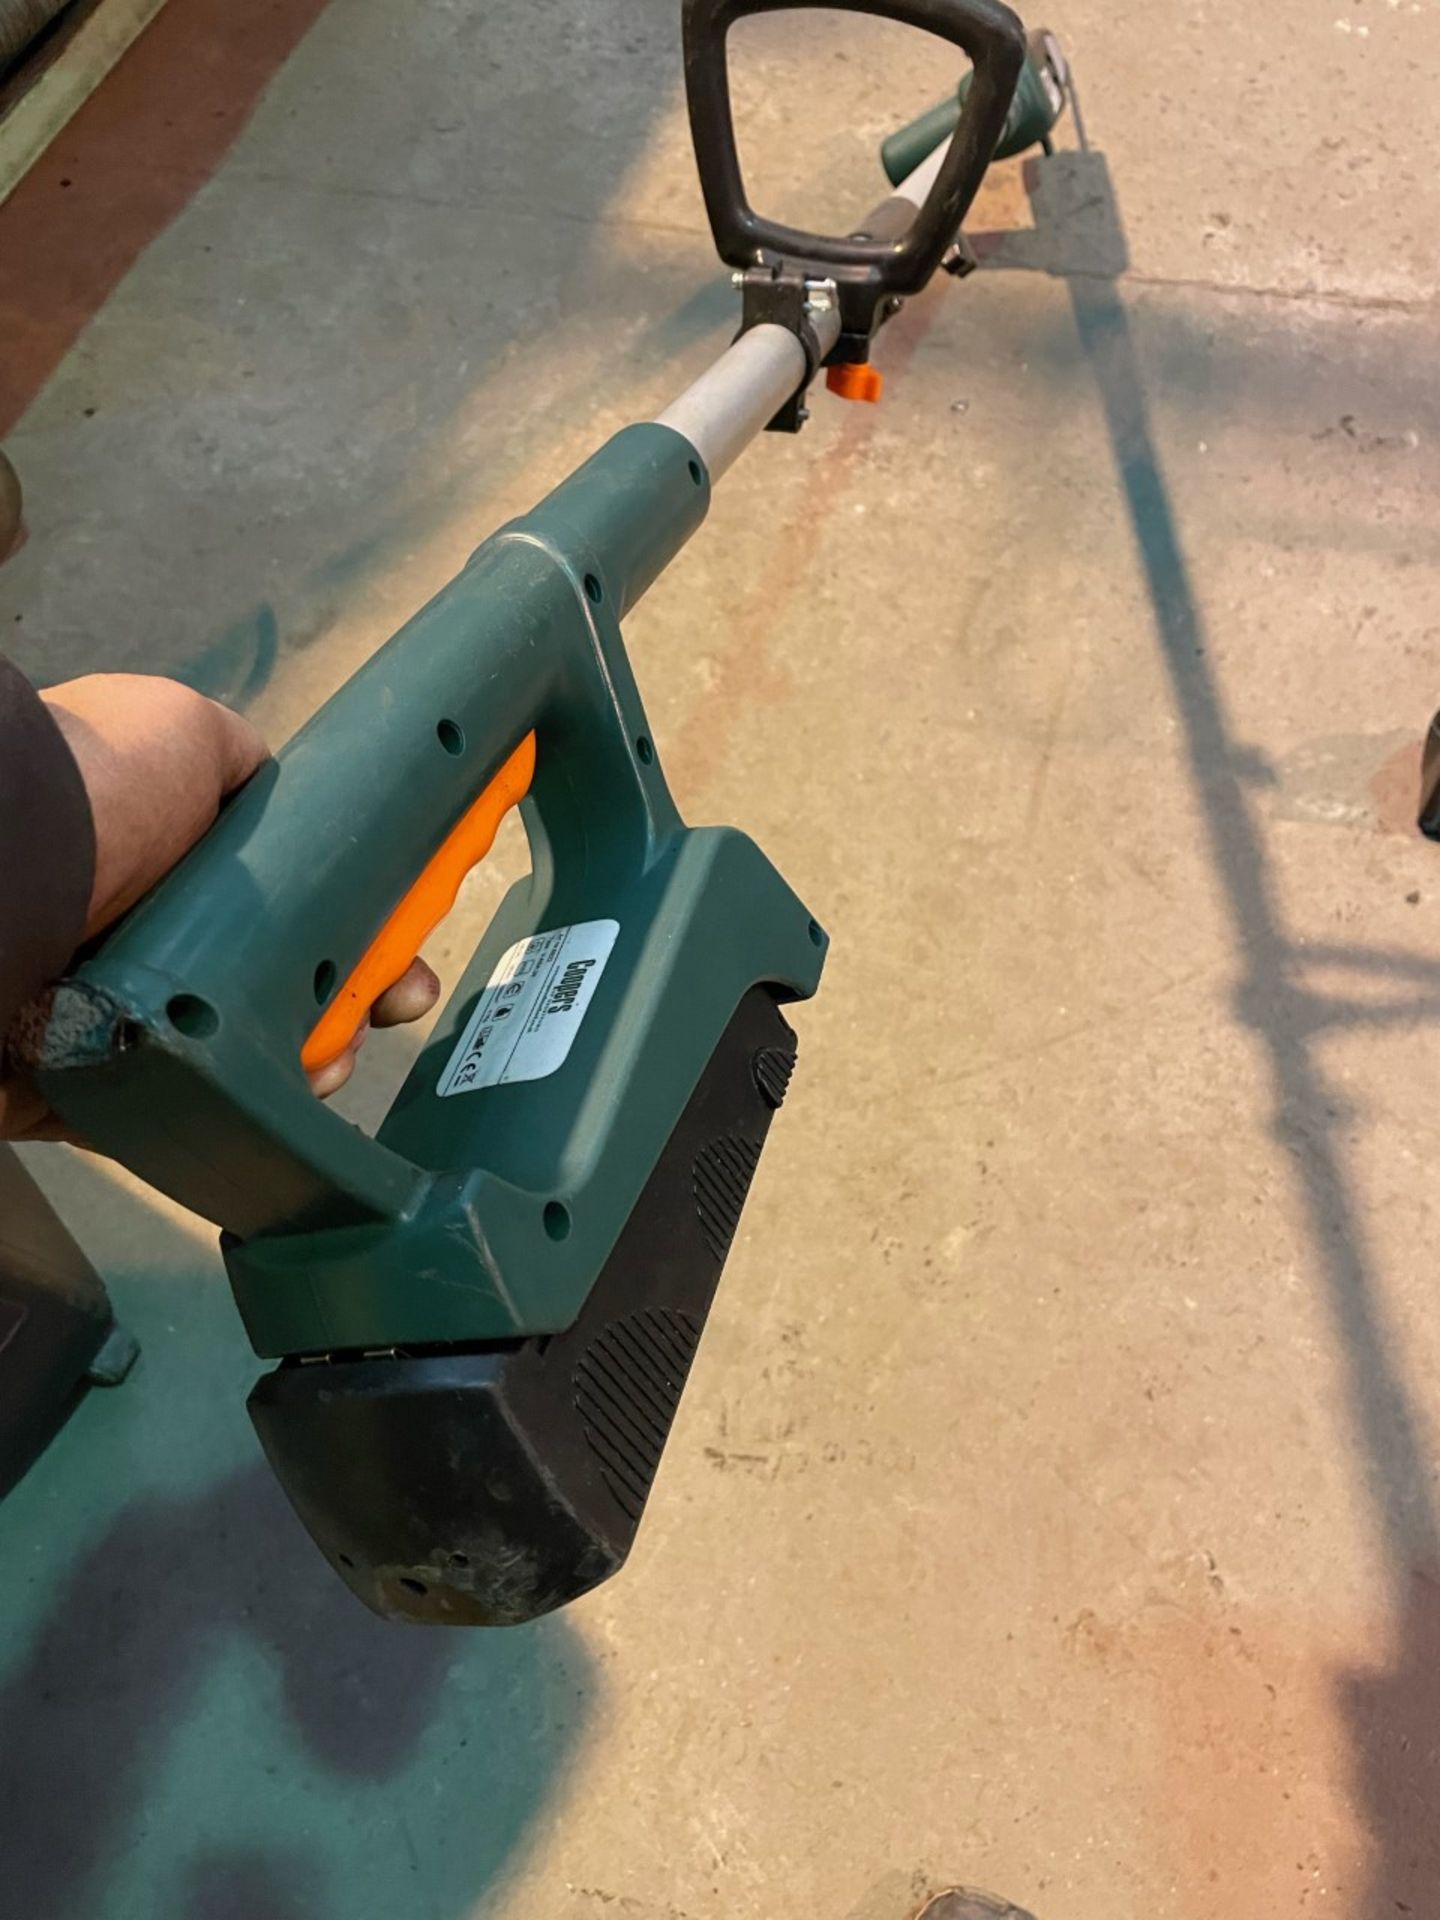 Coopers battery powered pole saw. No charger good condition - Image 2 of 3